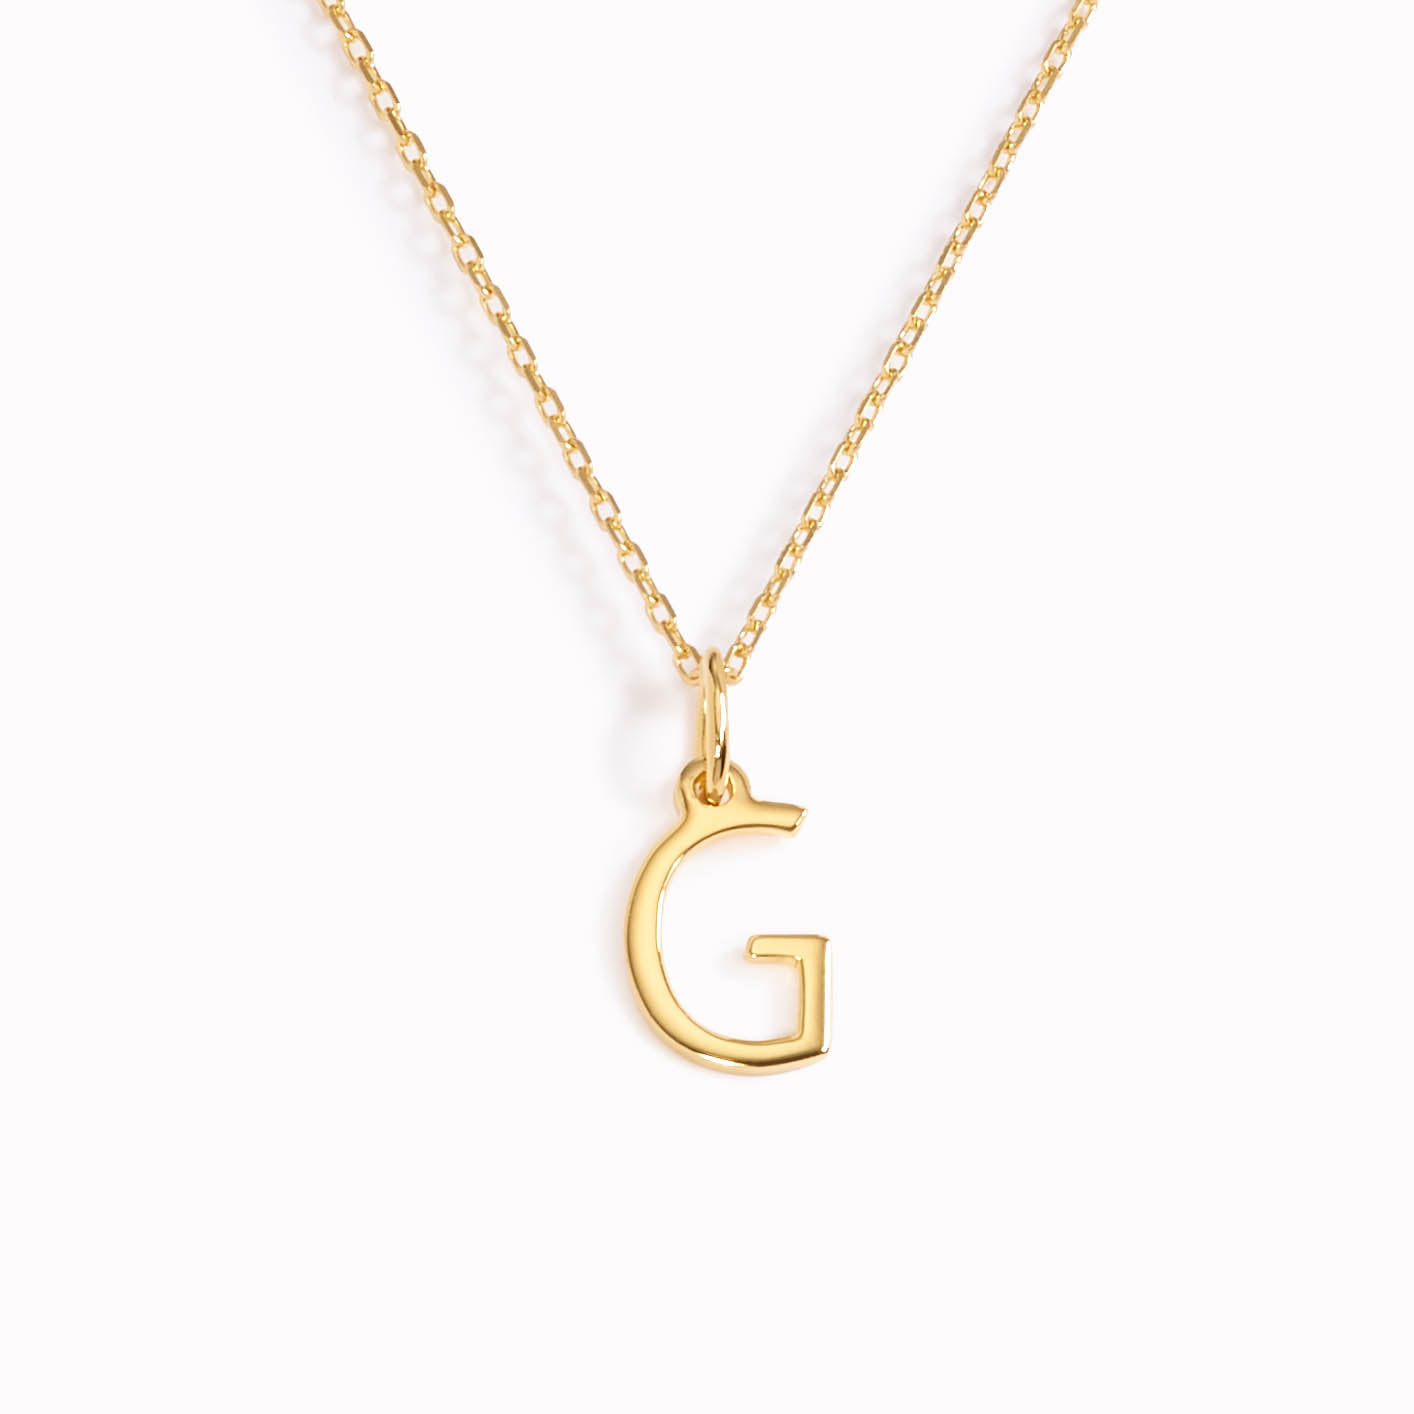 Buy Sterling Silver Cursive G Initial Necklace, G Letter Necklace, Cursive G  Initial Necklace, Silver G Letter Necklace, G Letter Necklace Online in  India - Etsy